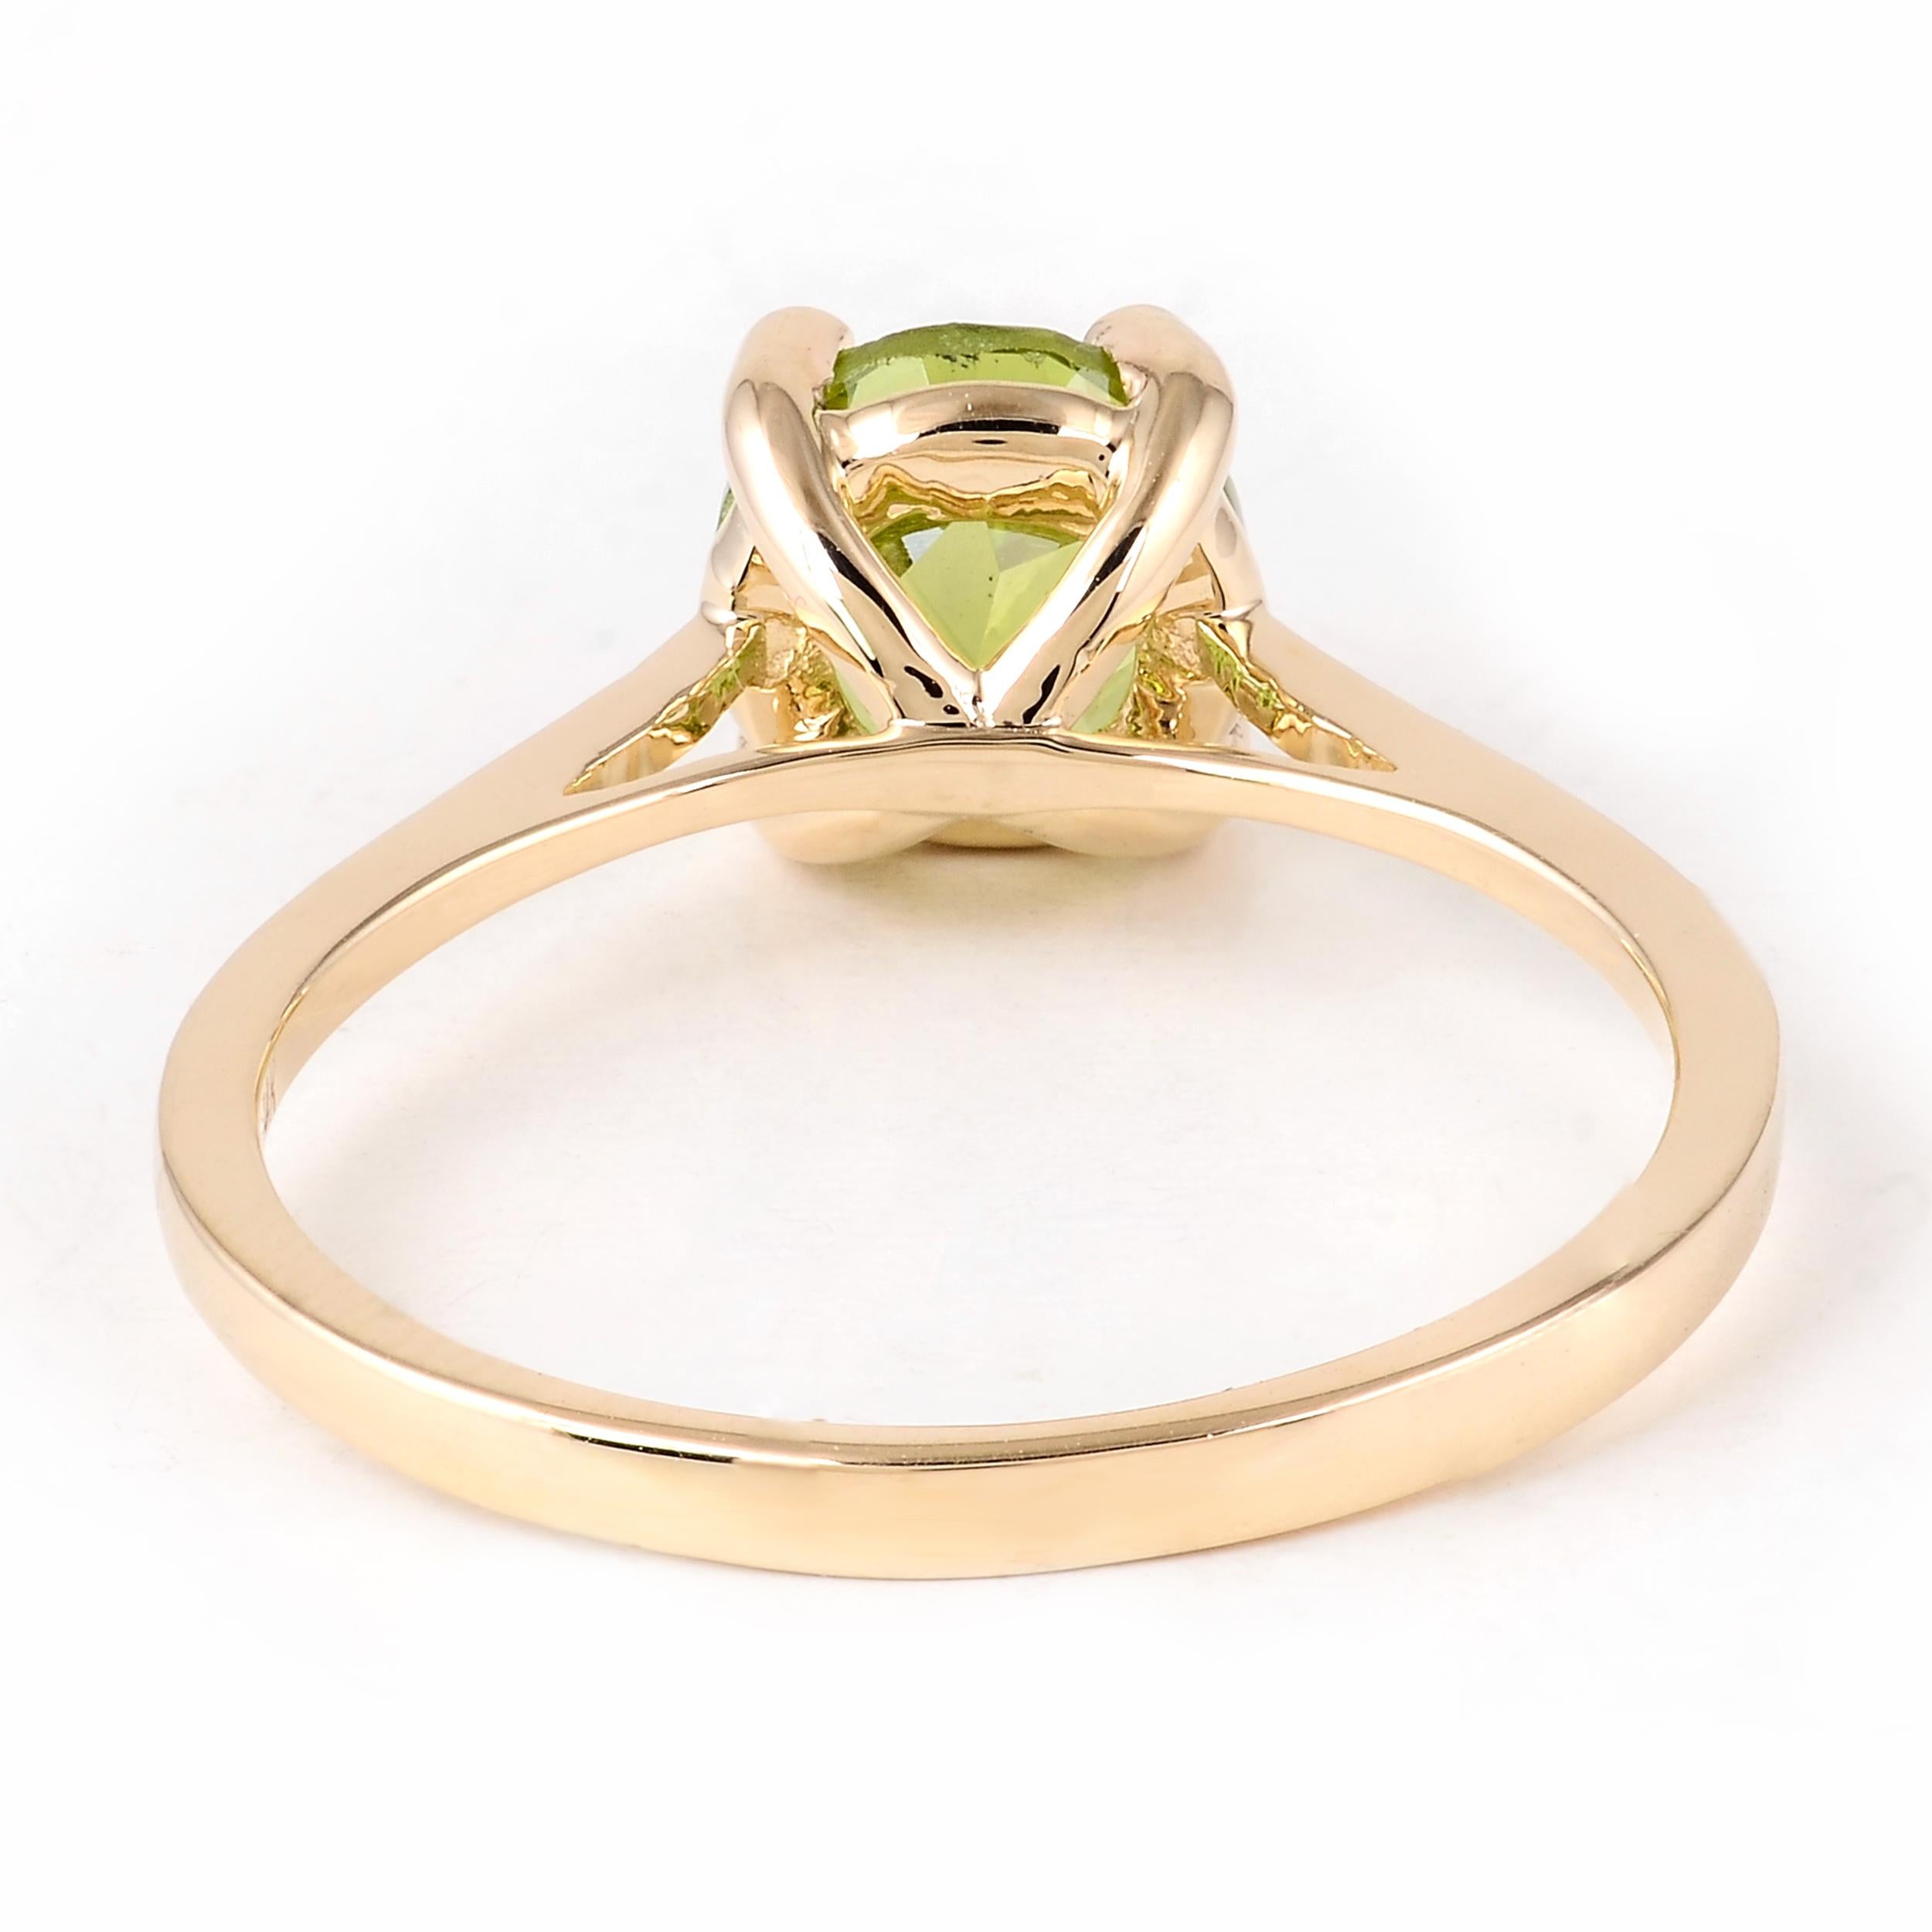 Chic 14K 1.09ct Peridot Solitaire Cocktail Ring, Size 7 - Statement Jewelry In New Condition For Sale In Holtsville, NY